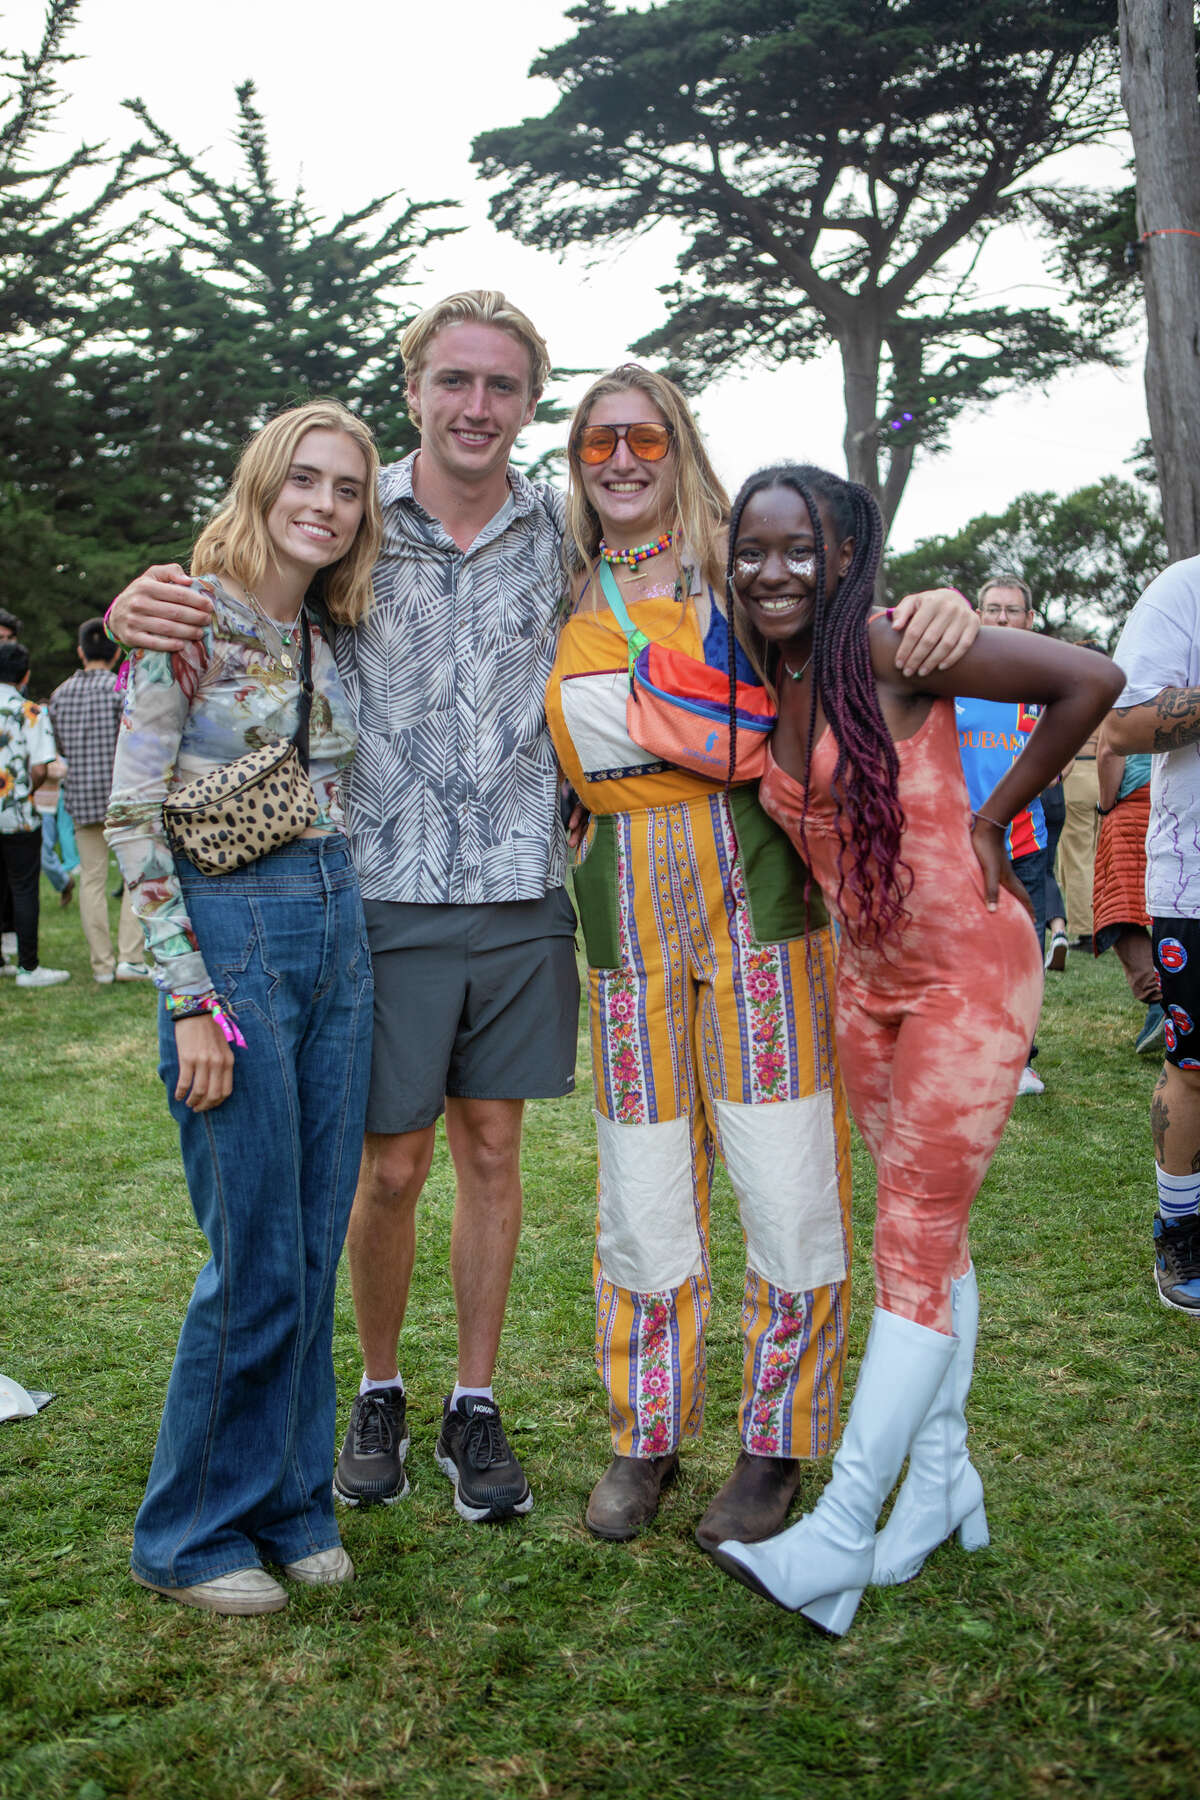 (Left to right) Anna McNulty, Jackson Purell, Ira Nates, and Jaelen Sobers at Outside Lands in Golden Gate Park in San Francisco, Calif. on Aug. 5, 2022.